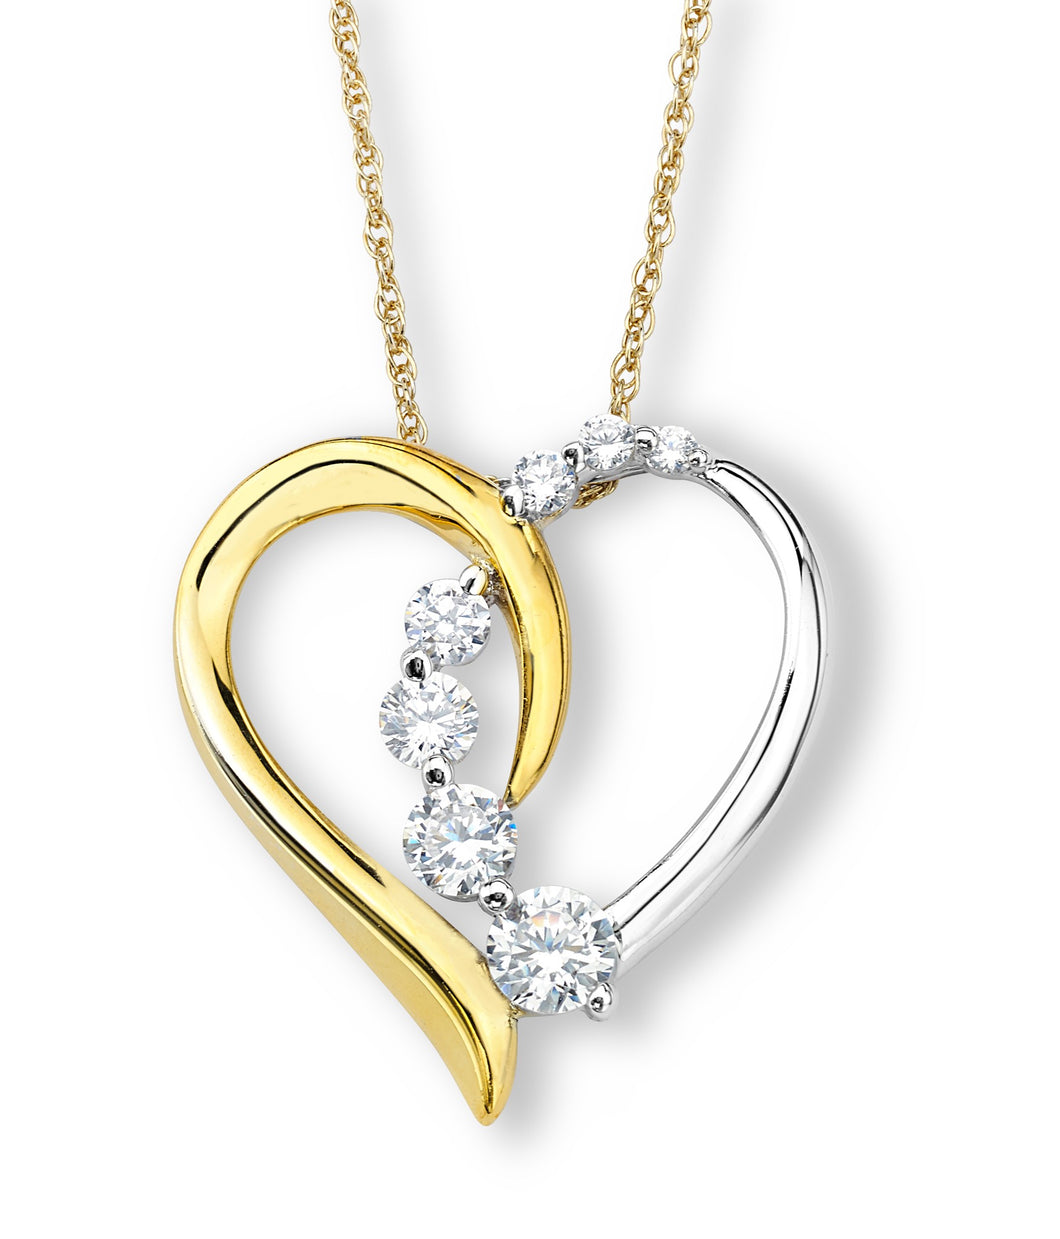 Sterling Silver and Gold Plated Heart with Cz Stones Ascending Down